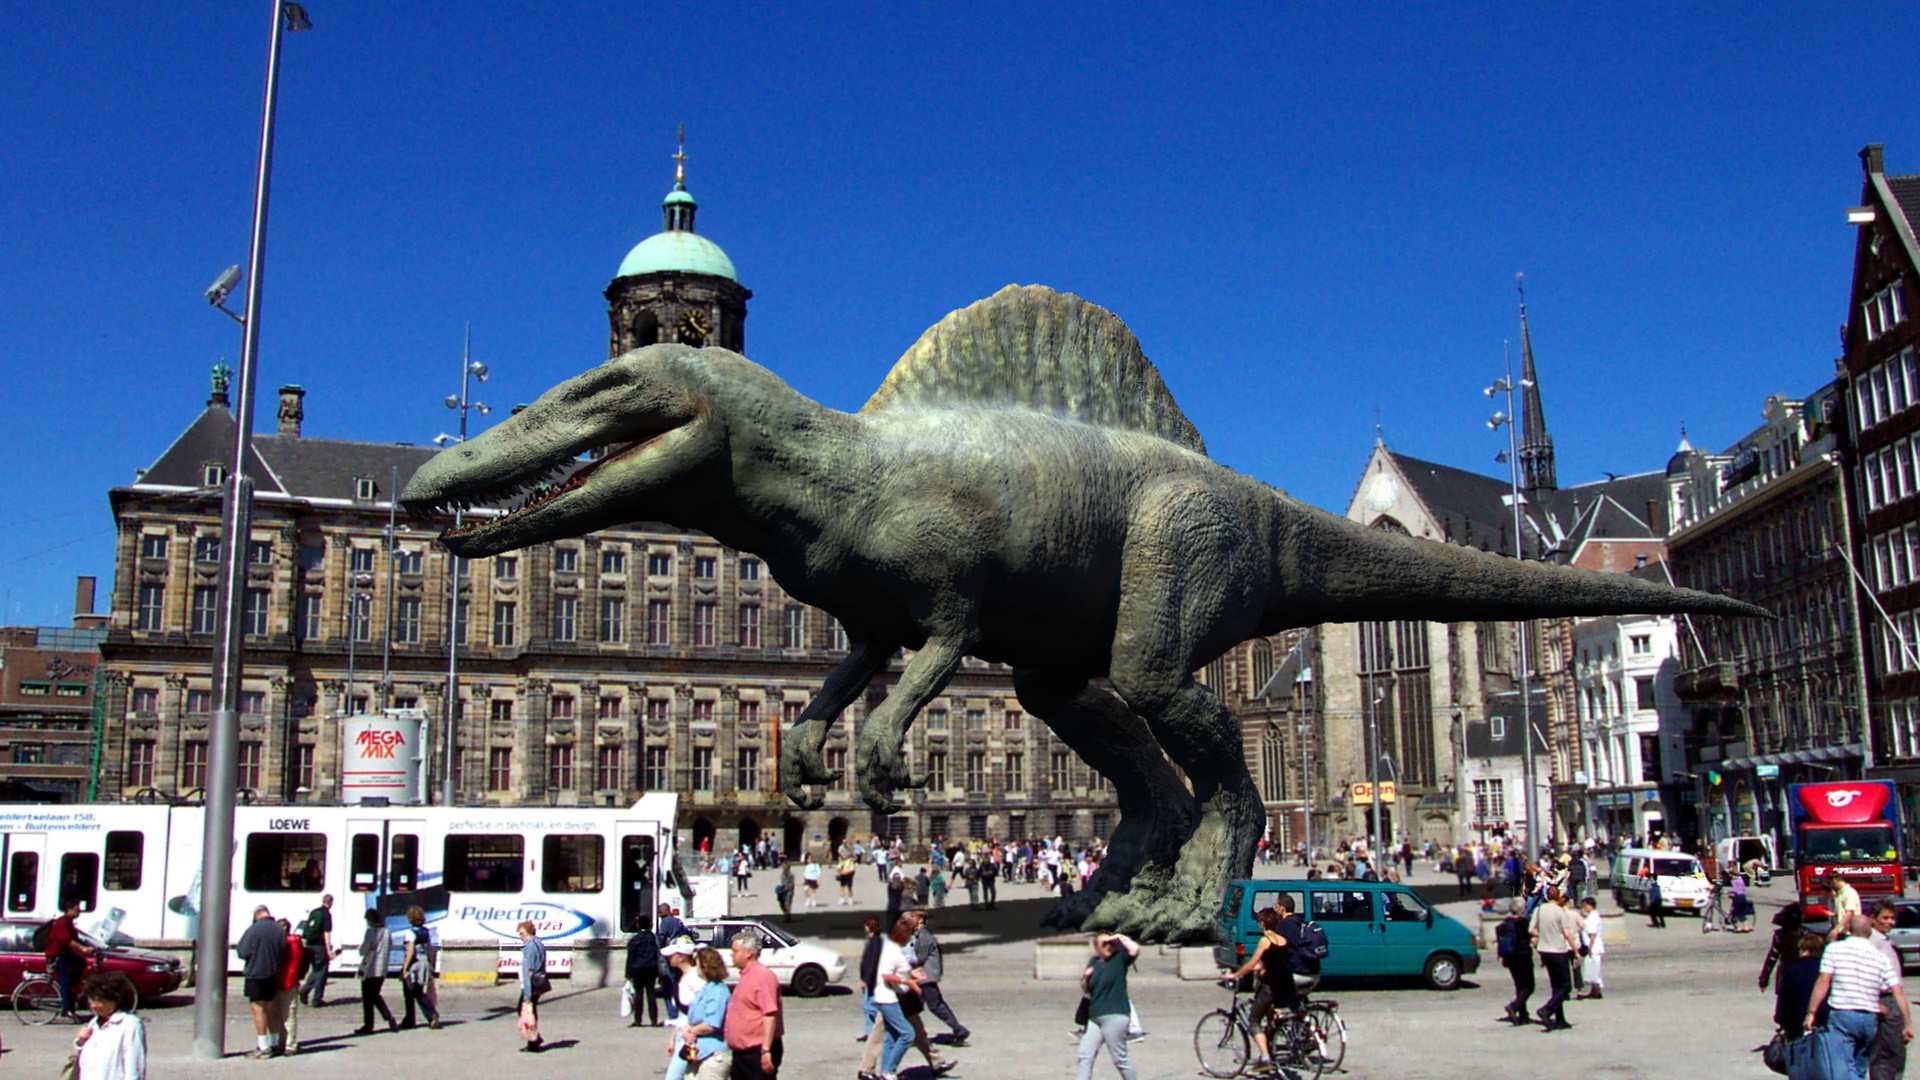 1920x1080 Spinosaurus at DAm square by BjornK Spinosaurus at DAm square by BjornK